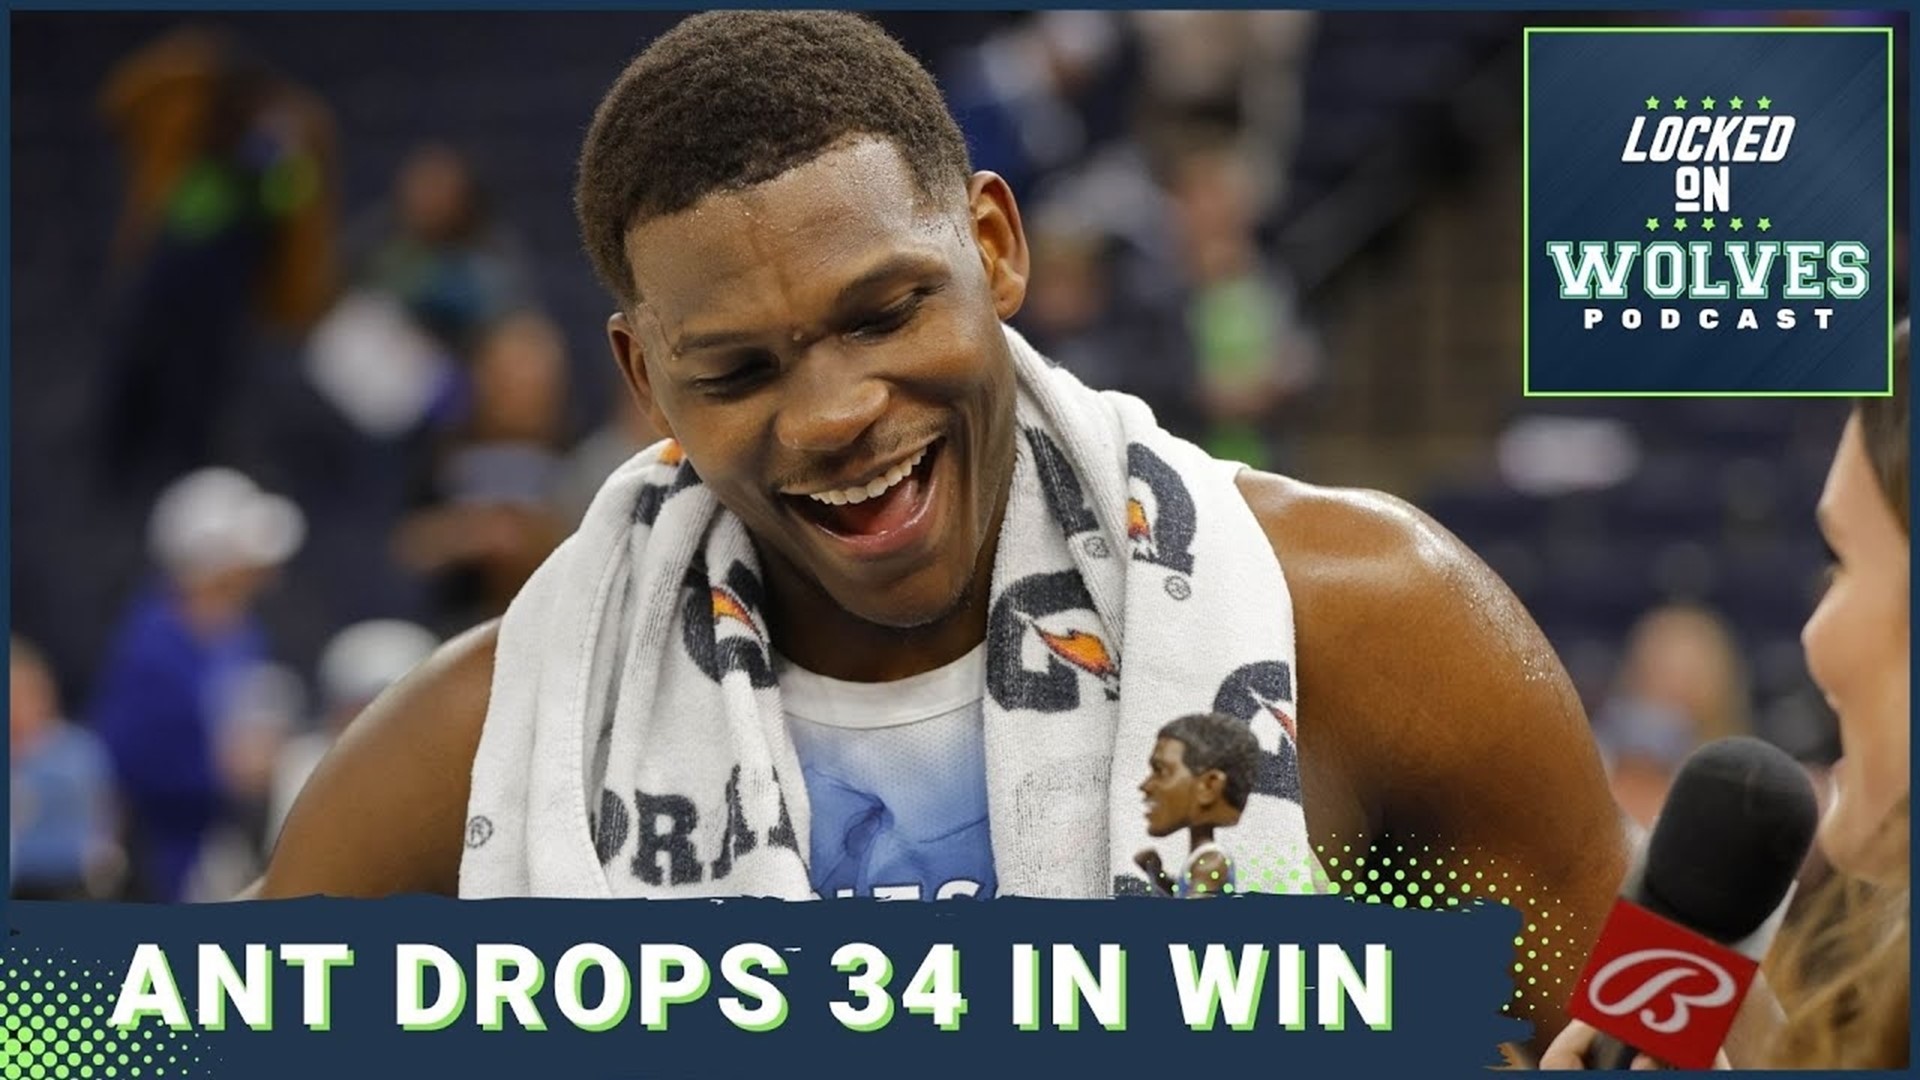 The Minnesota Timberwolves trailed at halftime to the Memphis Grizzlies but used a huge third quarter from Anthony Edwards to pull ahead and win.